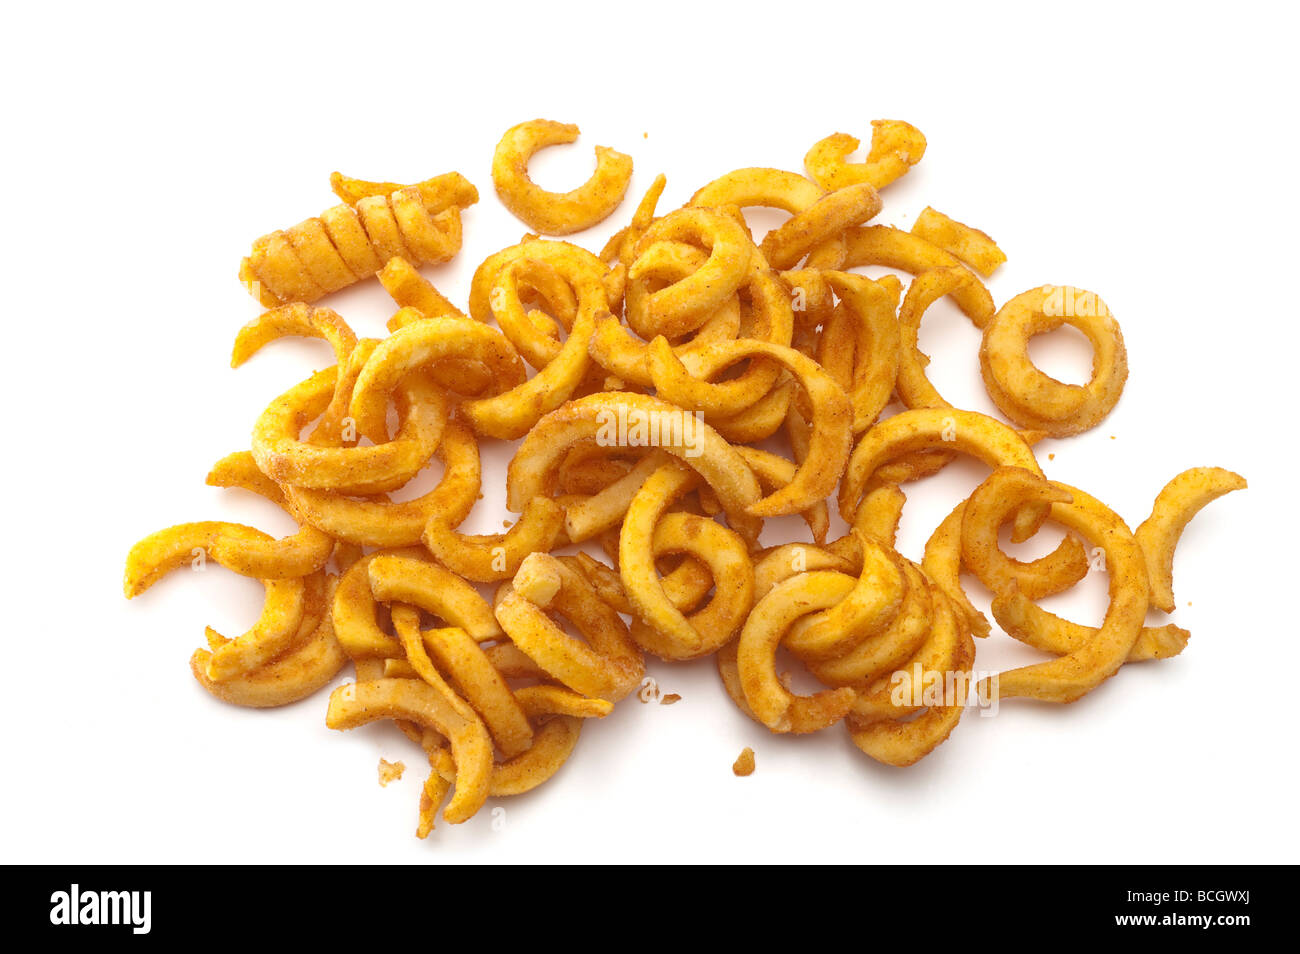 Pile of frozen curly 'oven ready' chips Stock Photo